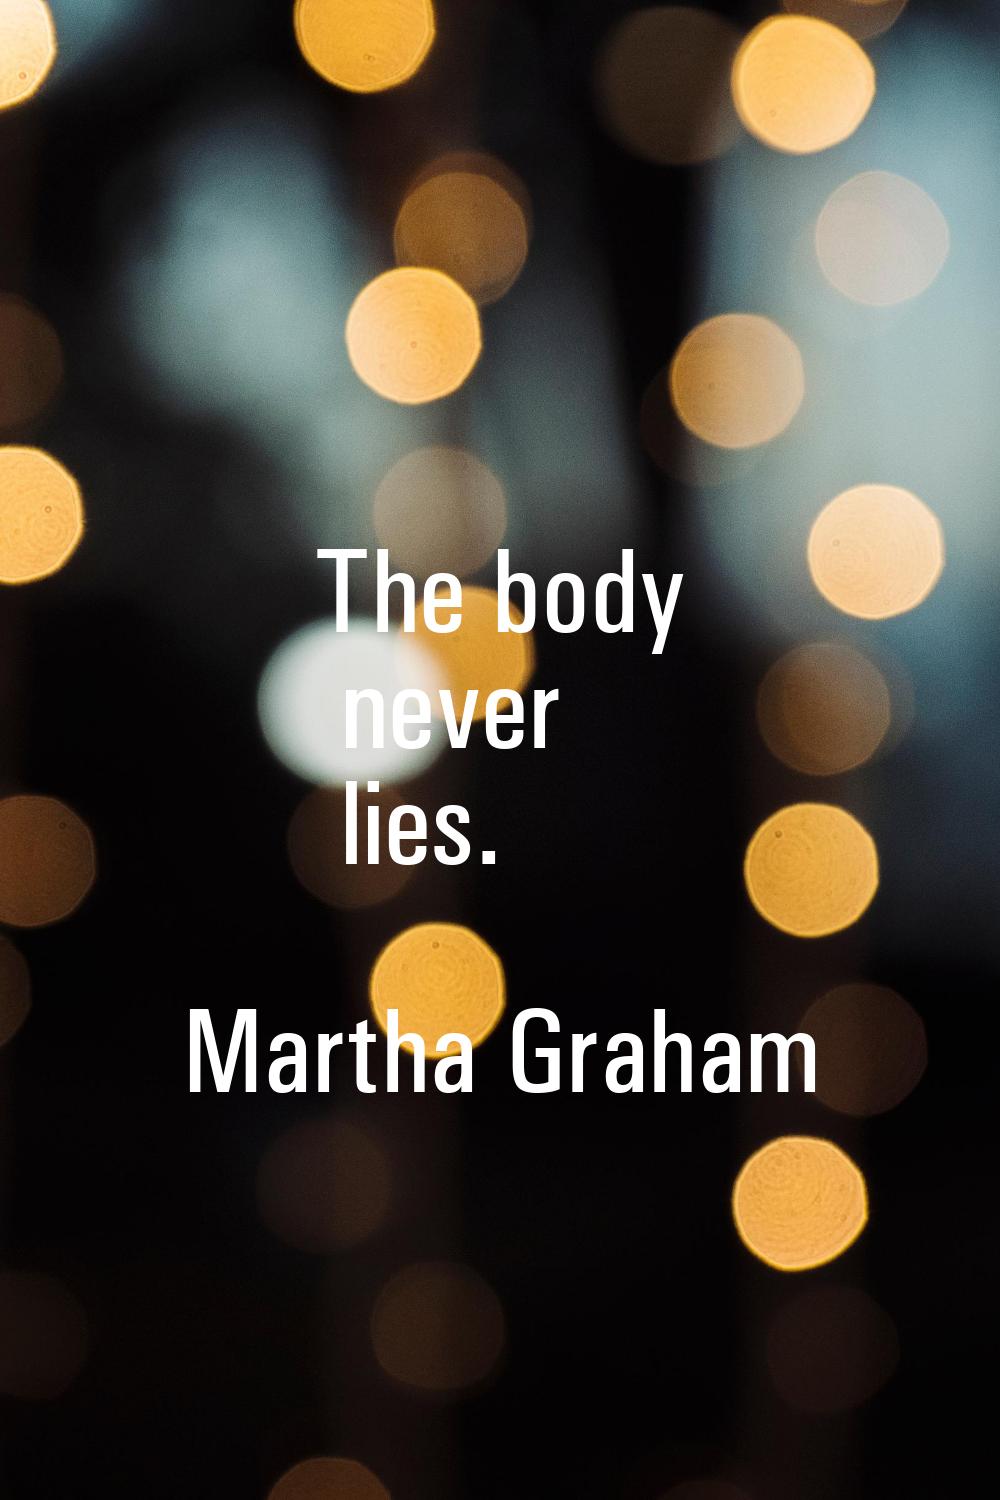 The body never lies.